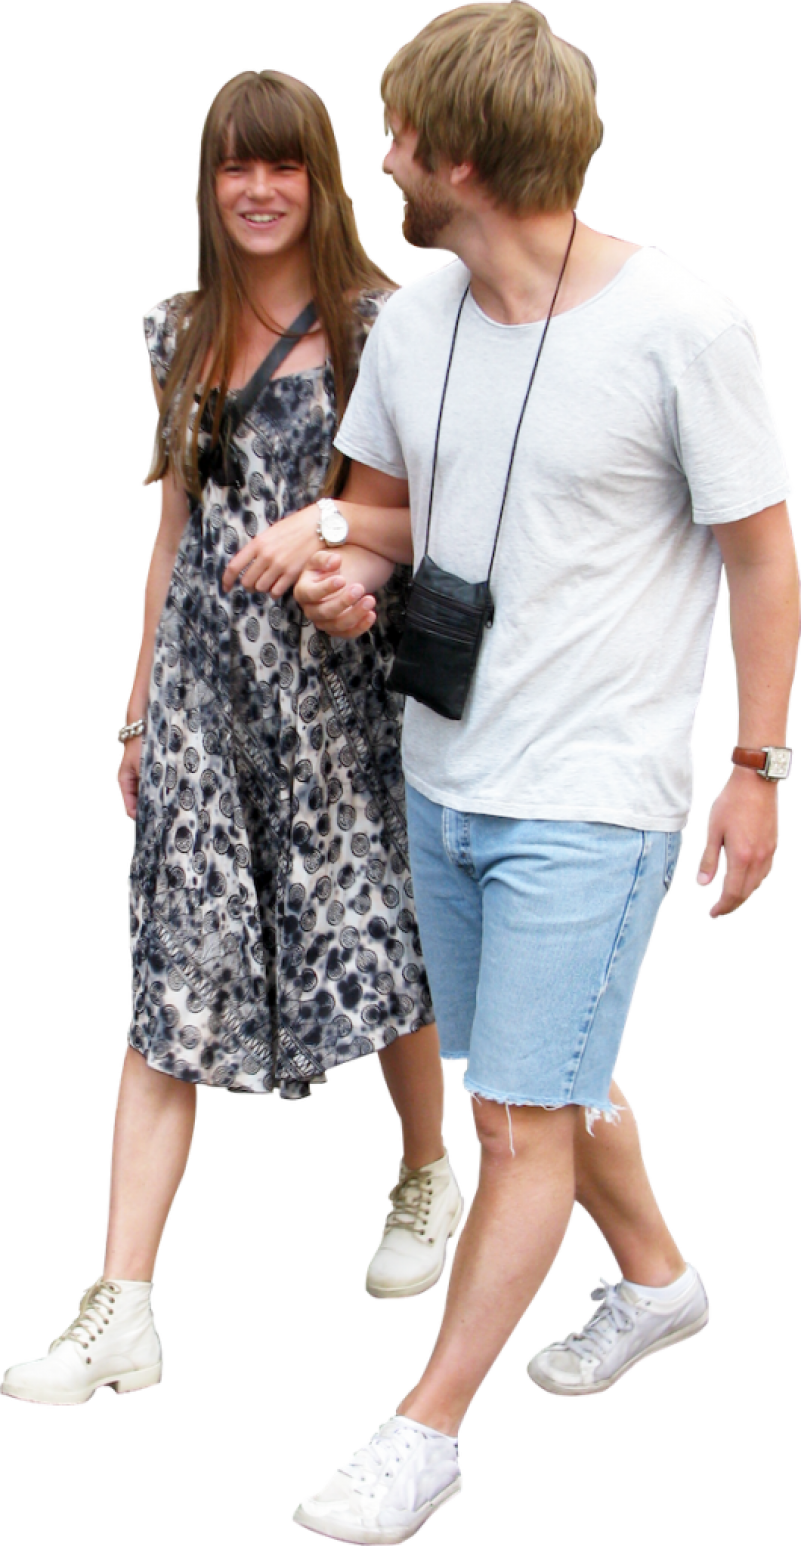 Casual Stroll Couple Summer Outfits PNG image